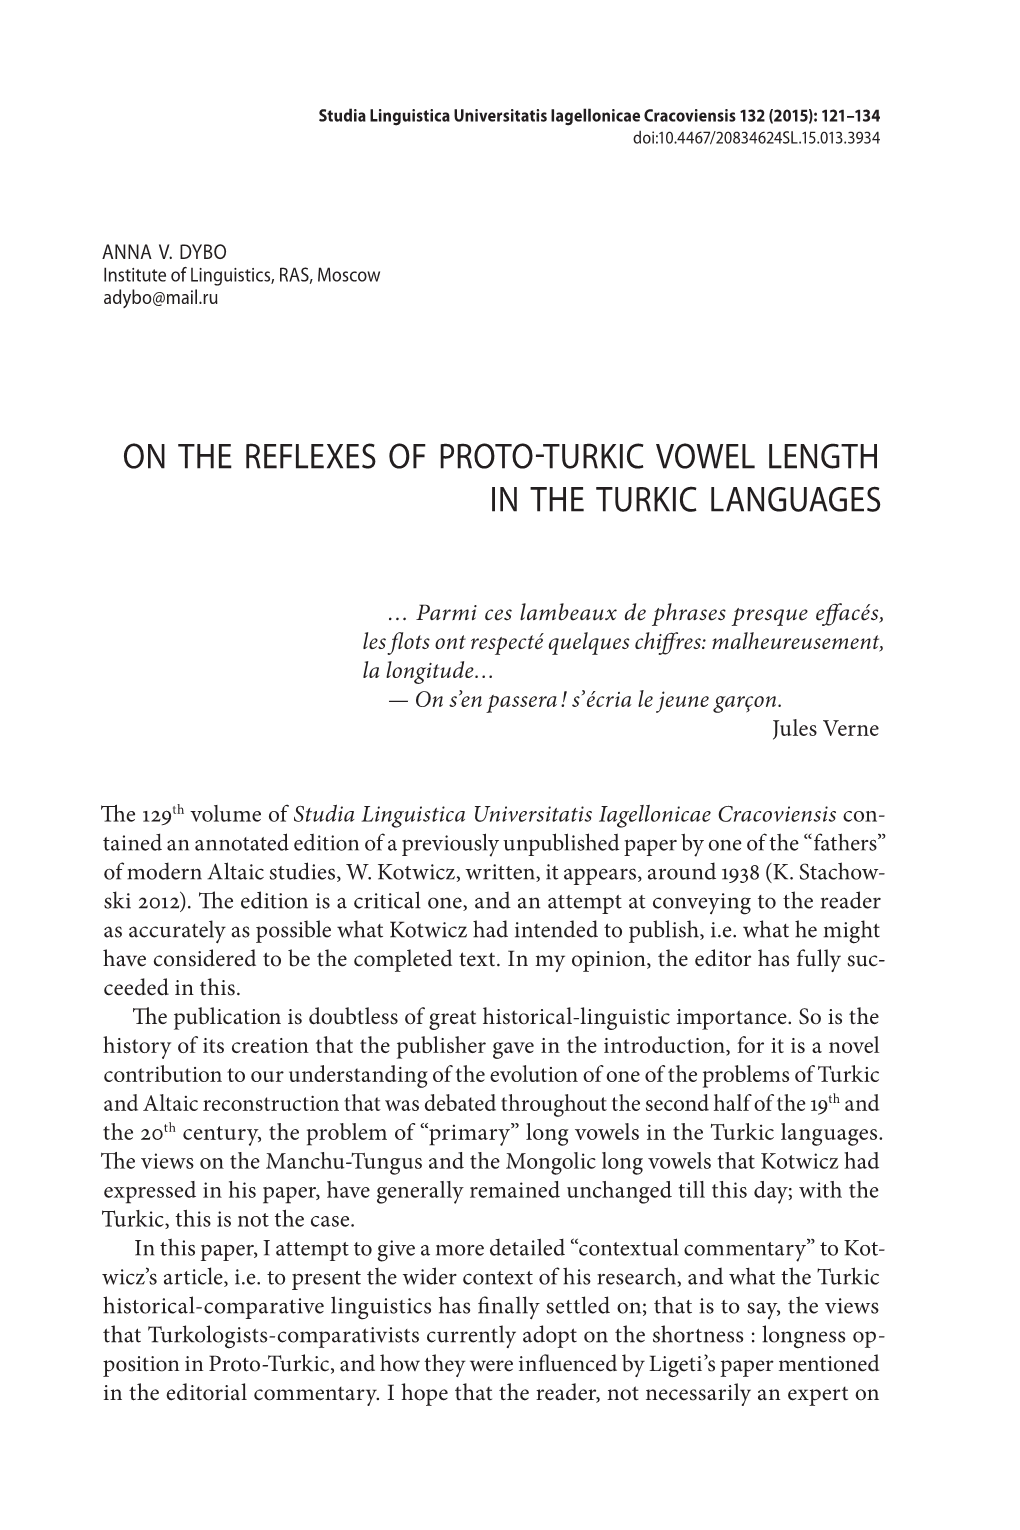 On the Reflexes of Proto-Turkic Vowel Length in the Turkic Languages